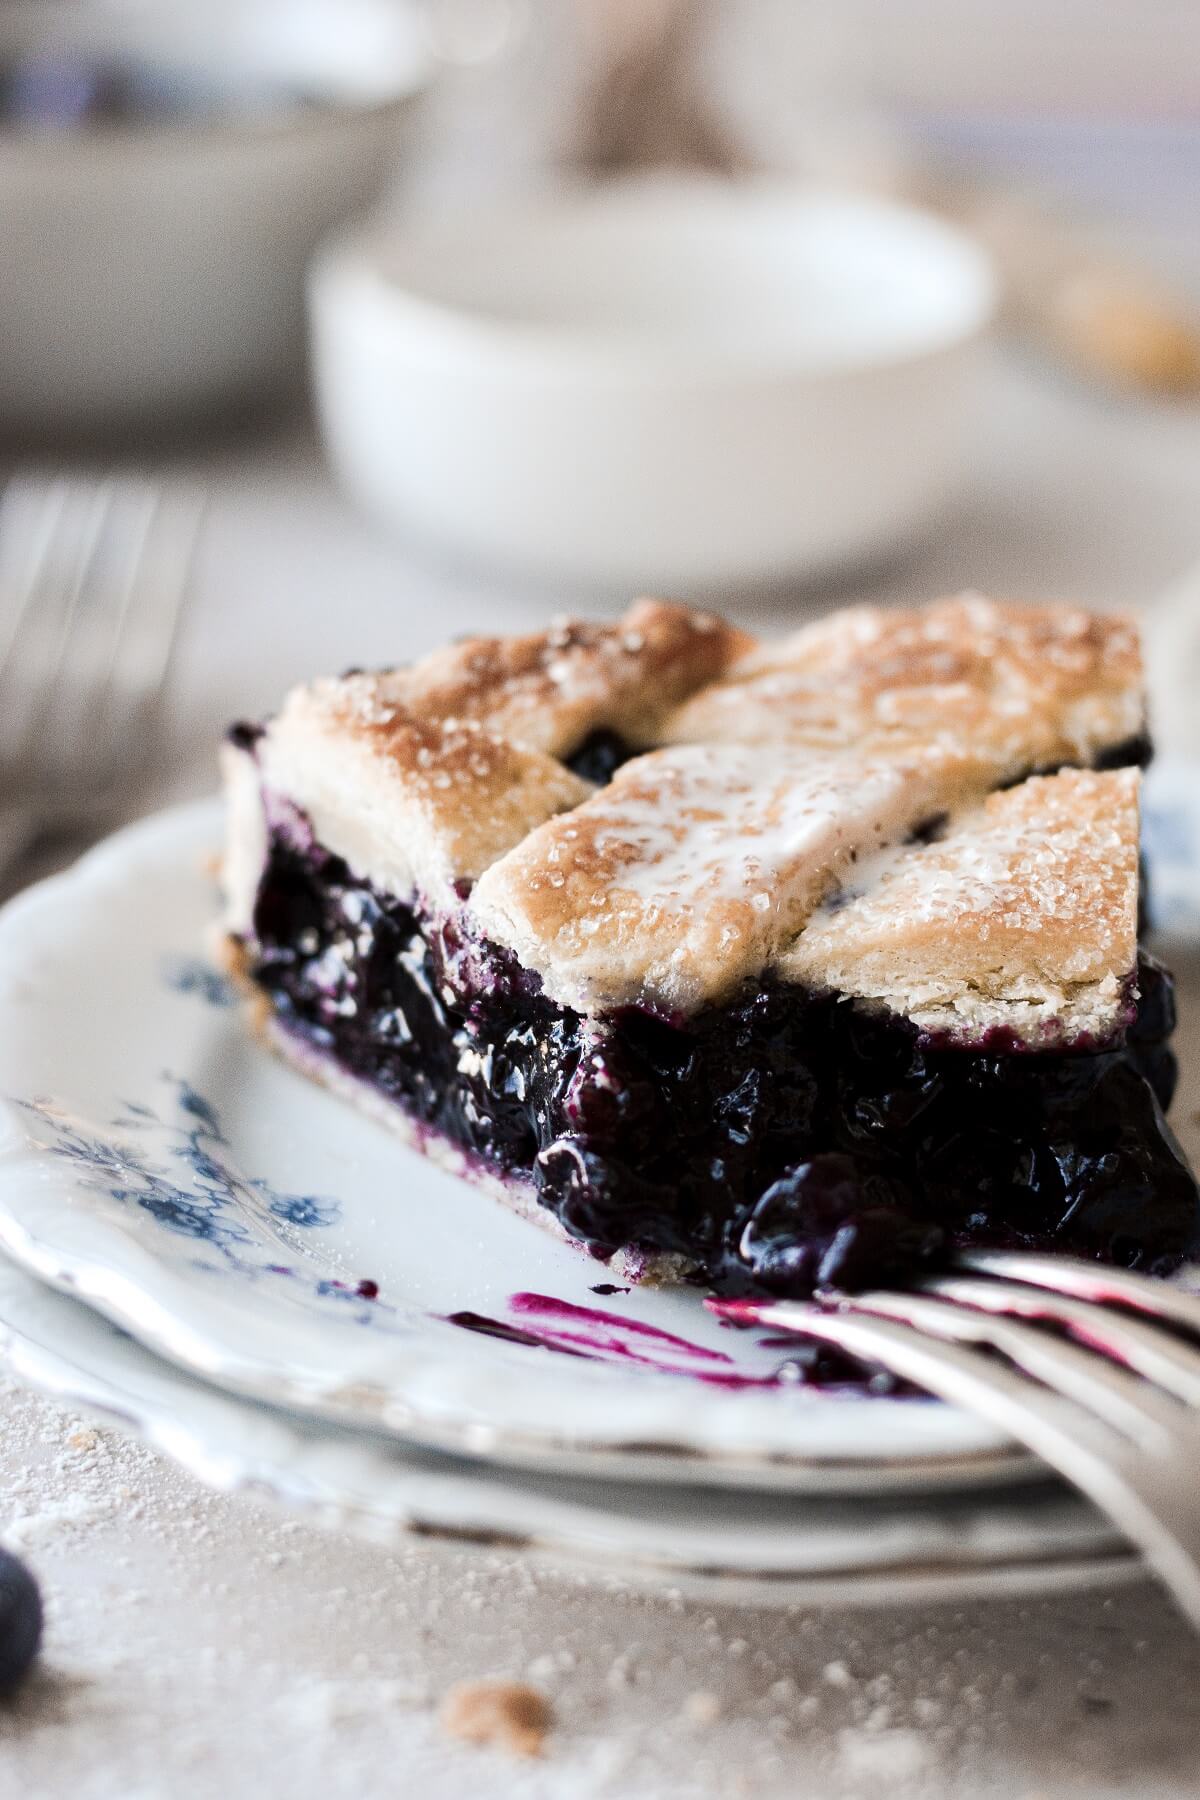 A slice of blueberry pie with one bite taken.